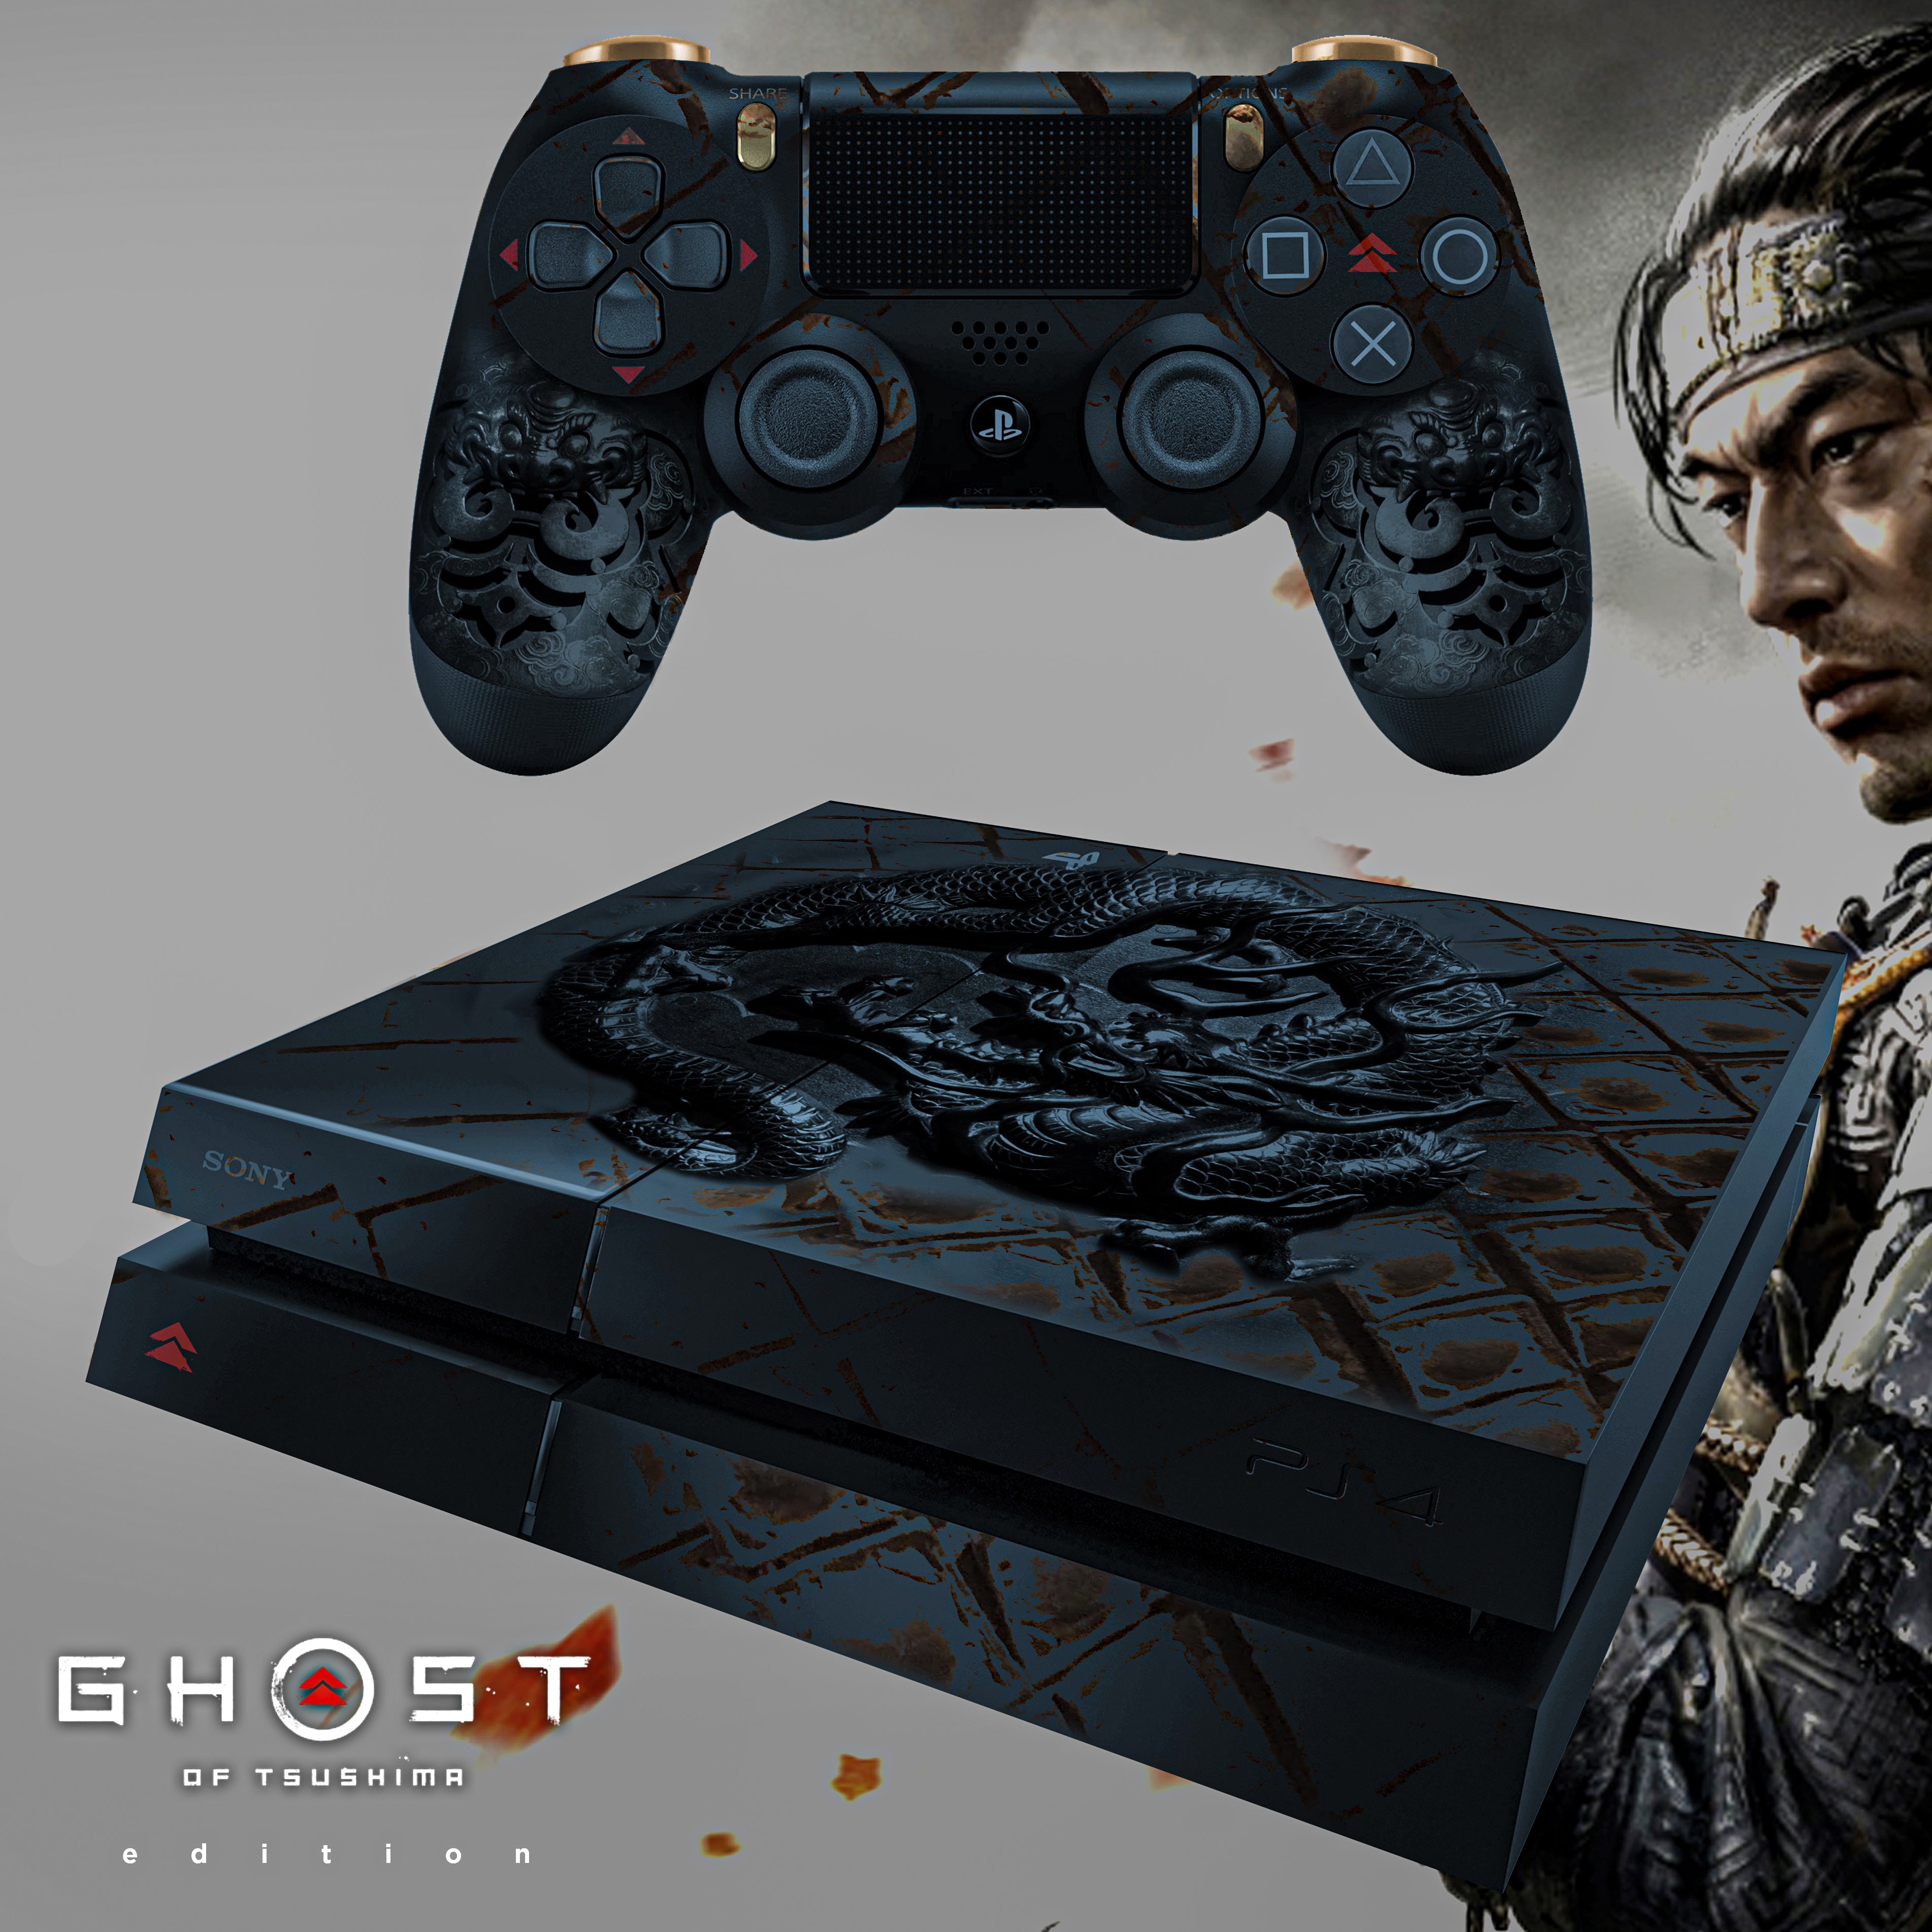 Ps4 игры 7. Ghost of Tsushima ps4. Ghost of Tsushima ПС 4. Ghost of Tsushima на пс5. Ghost на ПС 5.